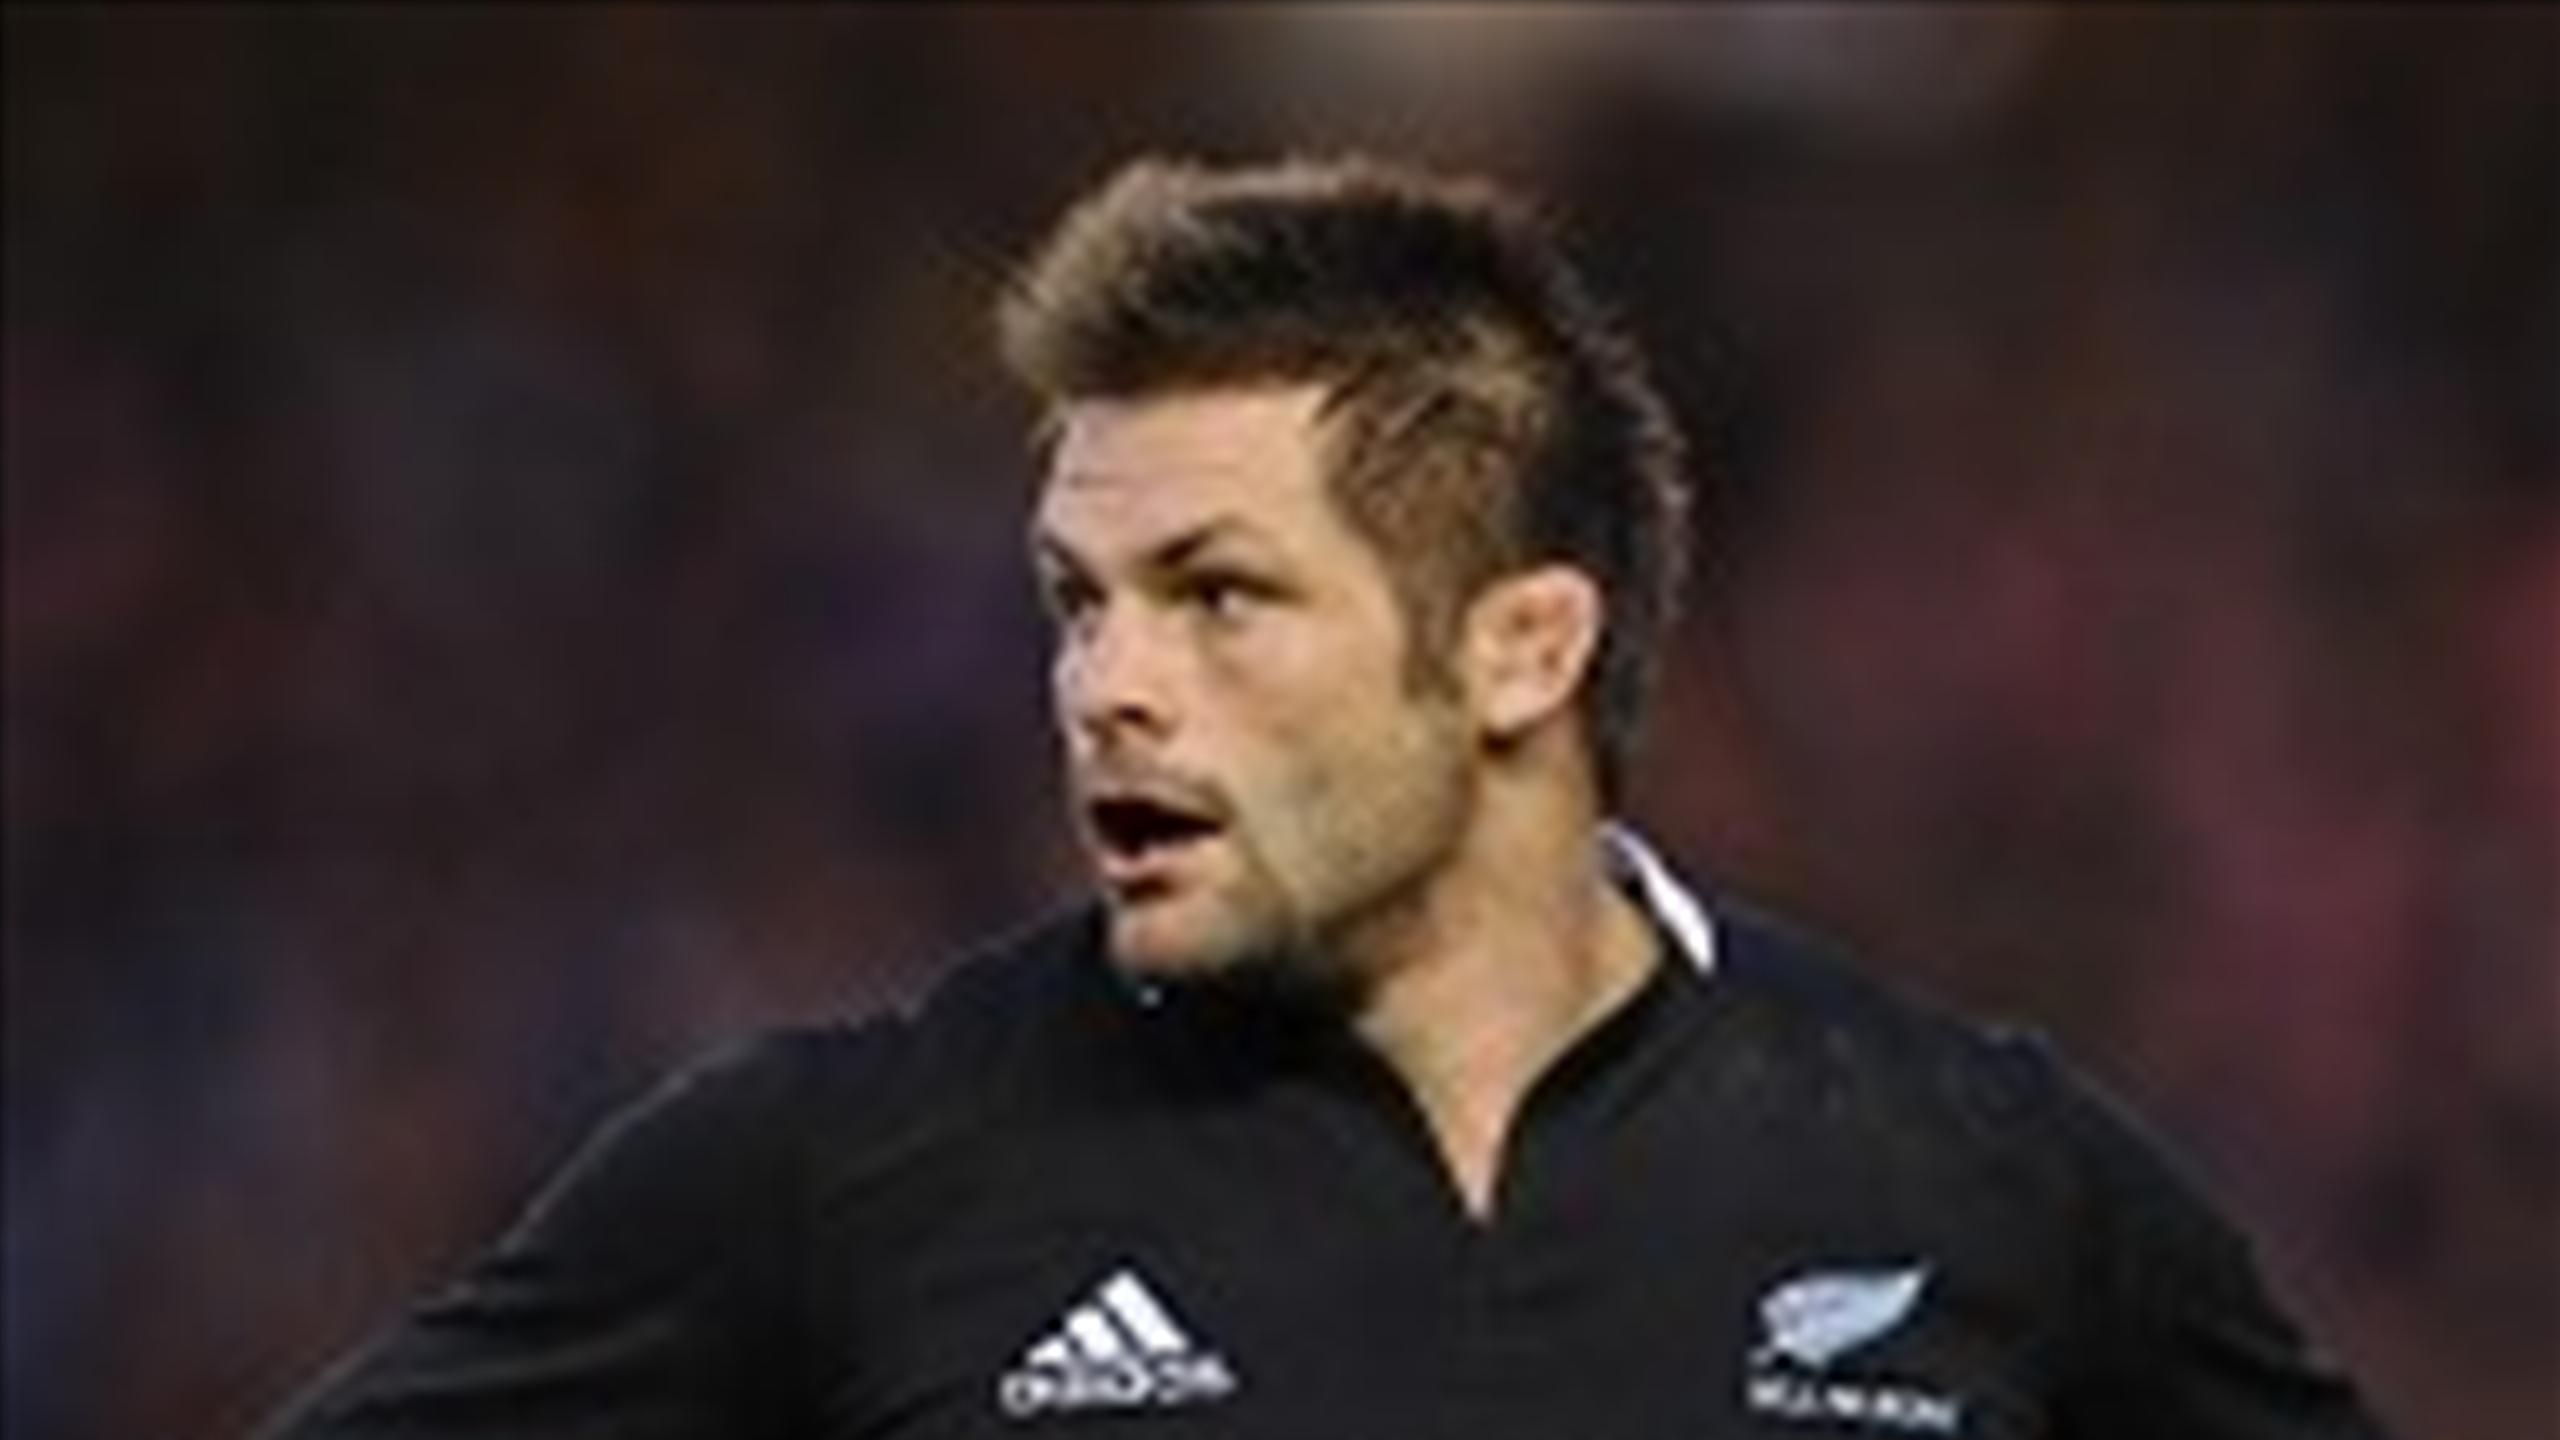 Richie McCaw: The farm boy who became the world's greatest rugby union  player - Eurosport